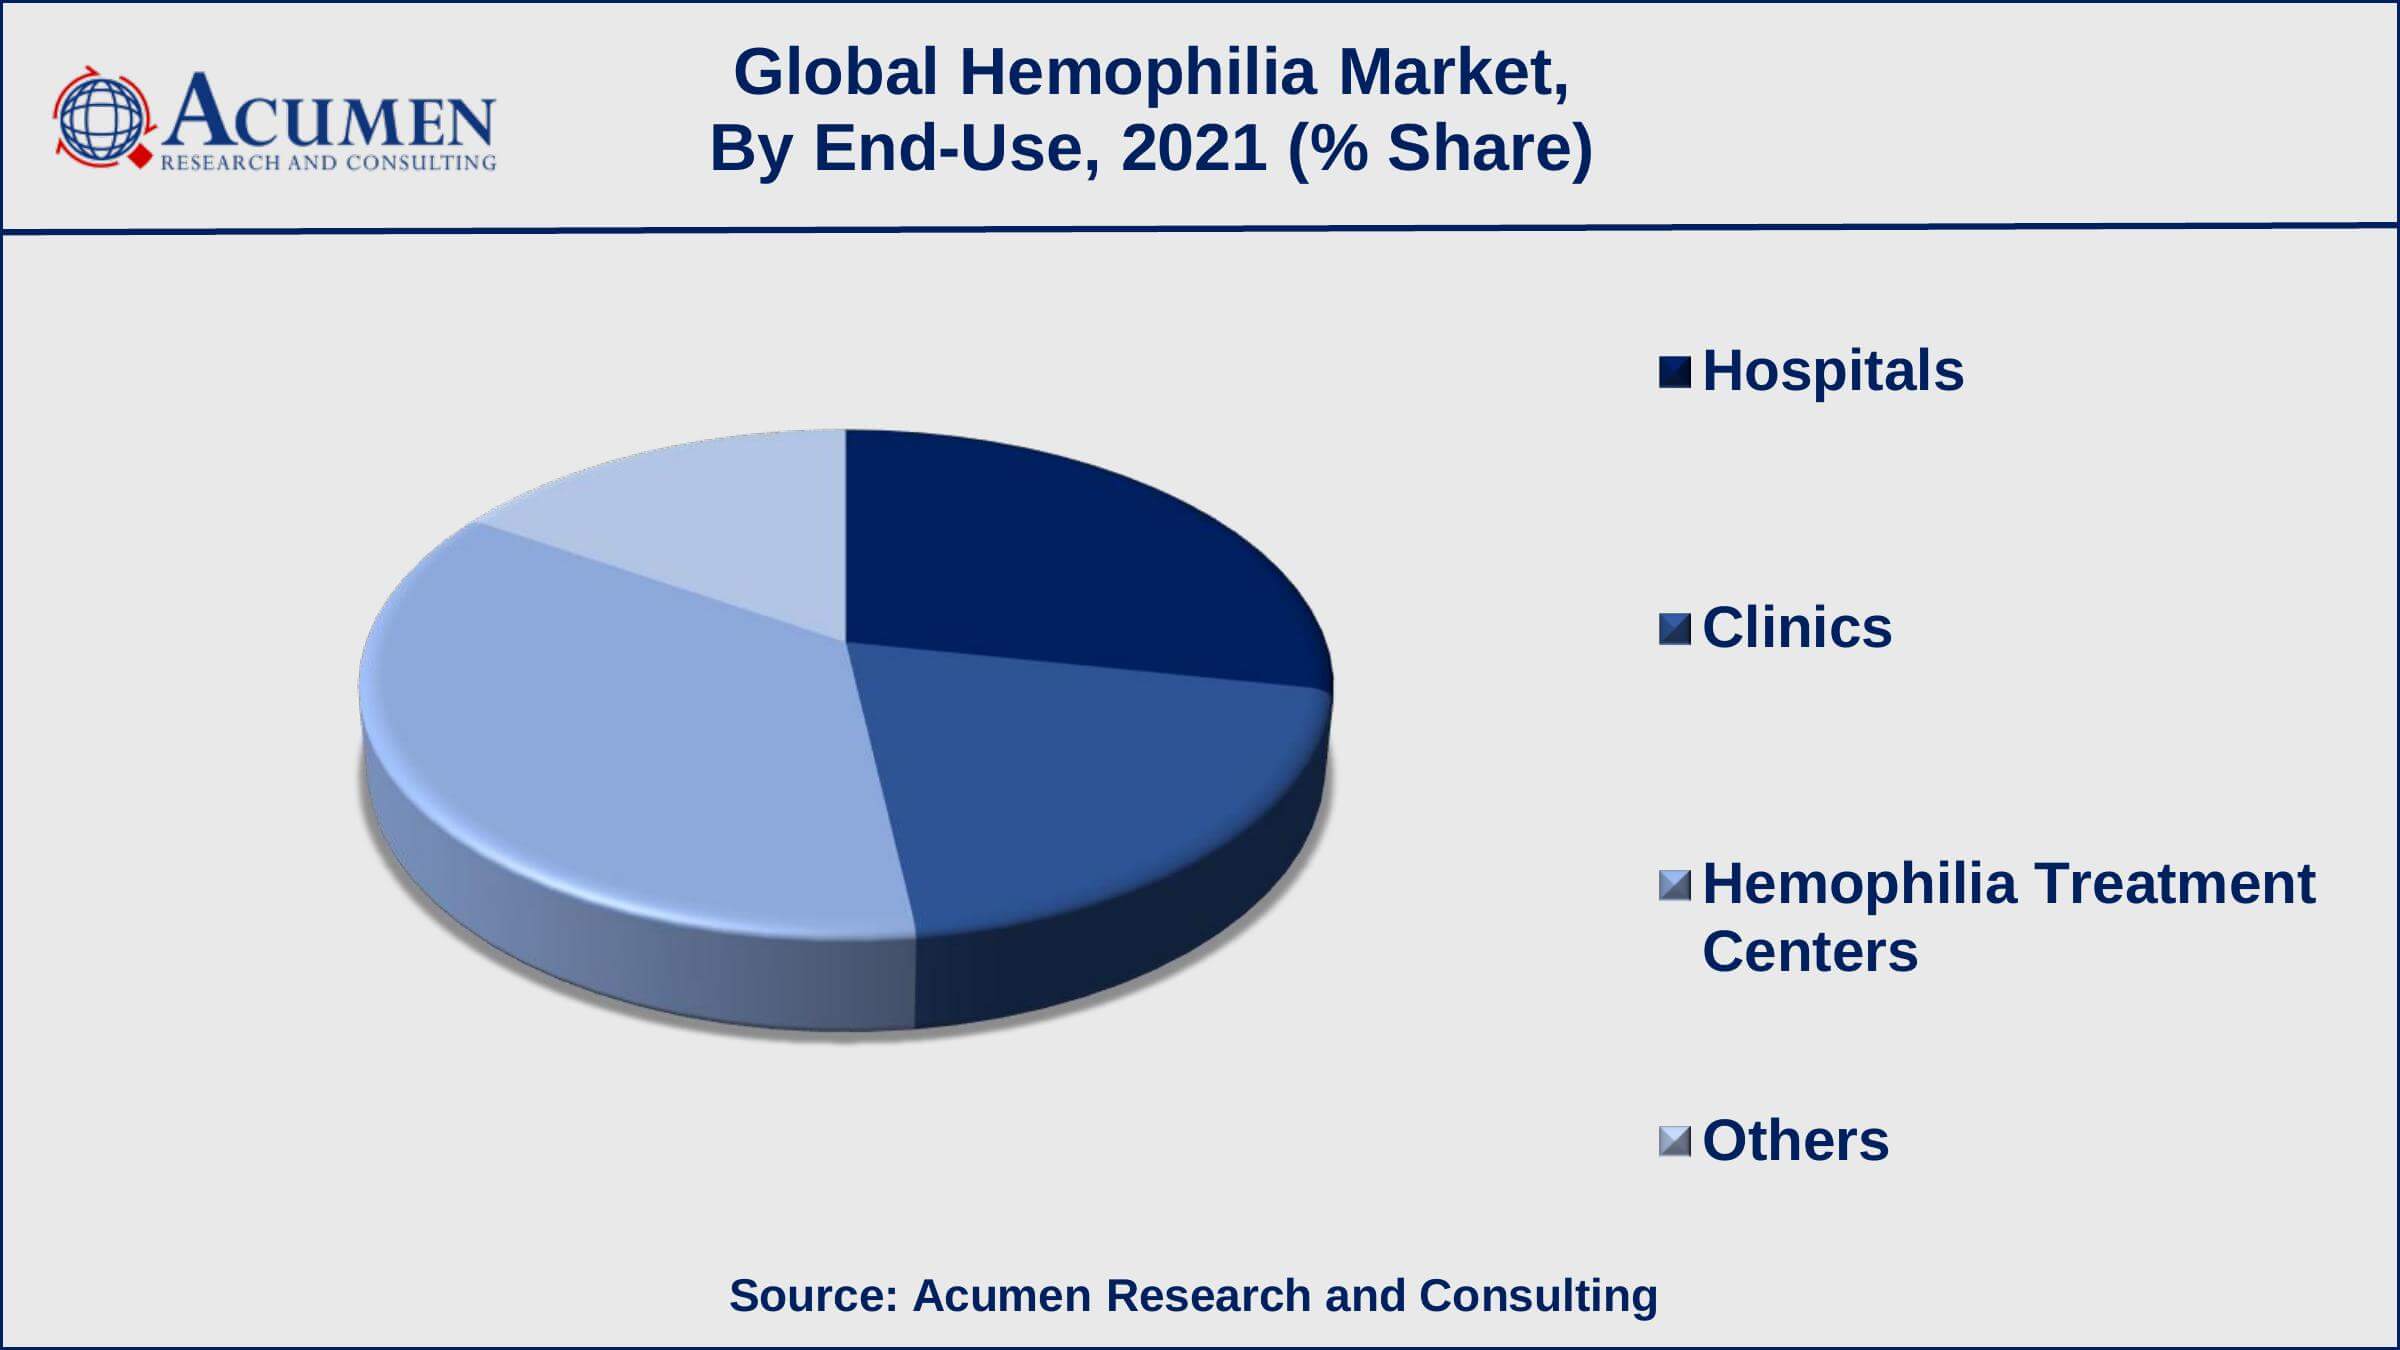 Among end-use, hemophilia treatment centers accounted for USD 4.4 billion in 2021